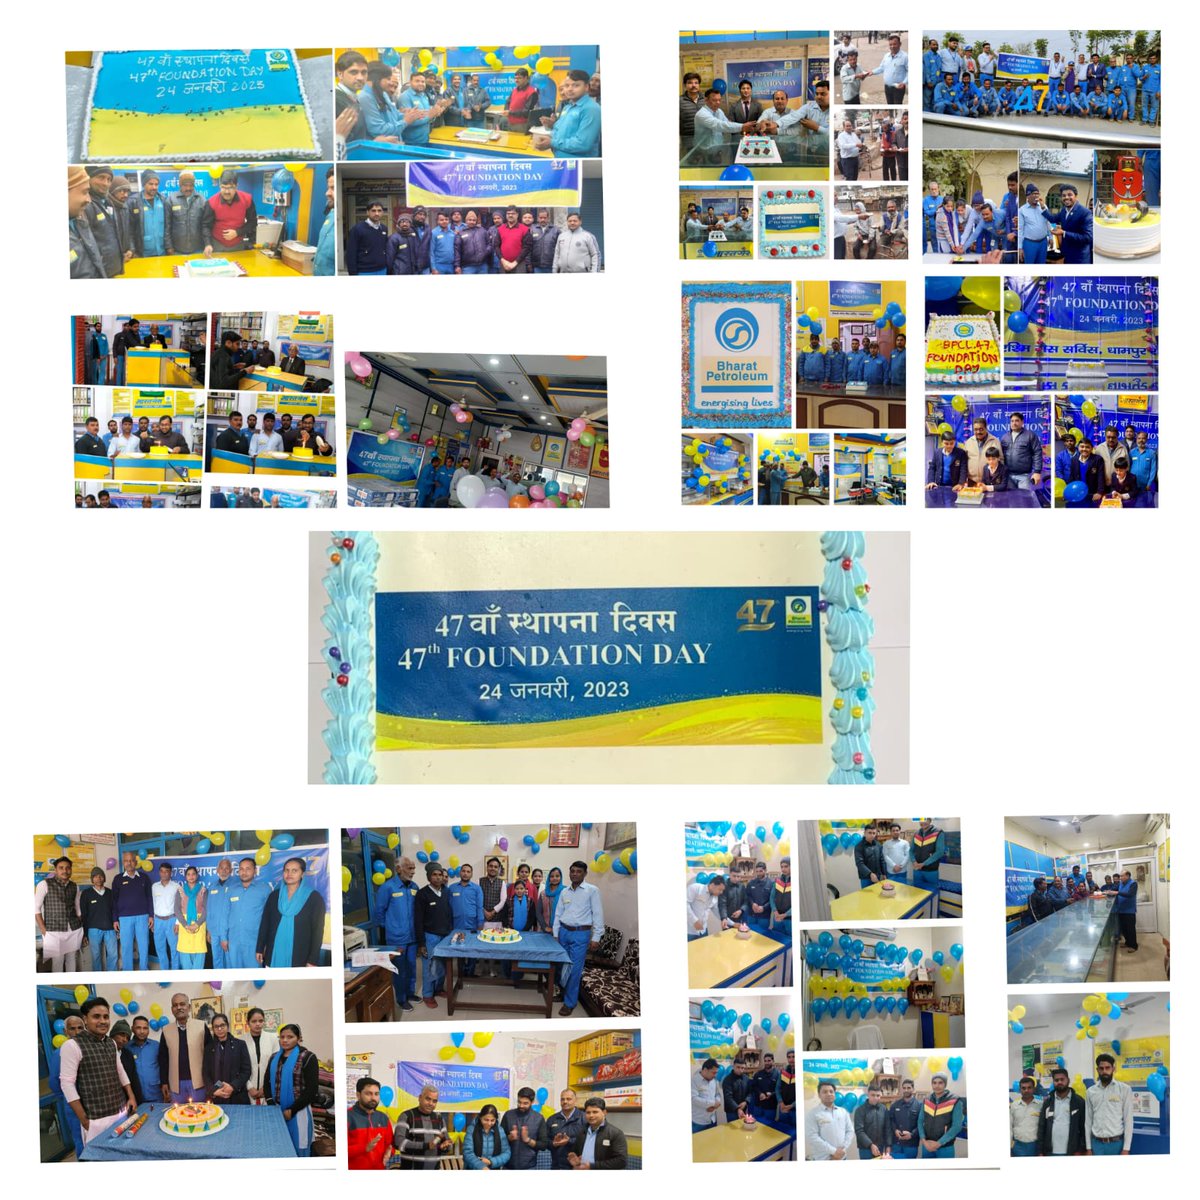 47th #FoundationDay of @BPCLimited celebrated by all Bharatgas distributors in Loni LPG Territory.
#FoundationDay #47FoundationDay #BPCL #Energy #EnergyCompany #Heritage #Oil #India

@BpclStateLPGUP @MonaSrivastava9 @nairran1 @BPCLimited